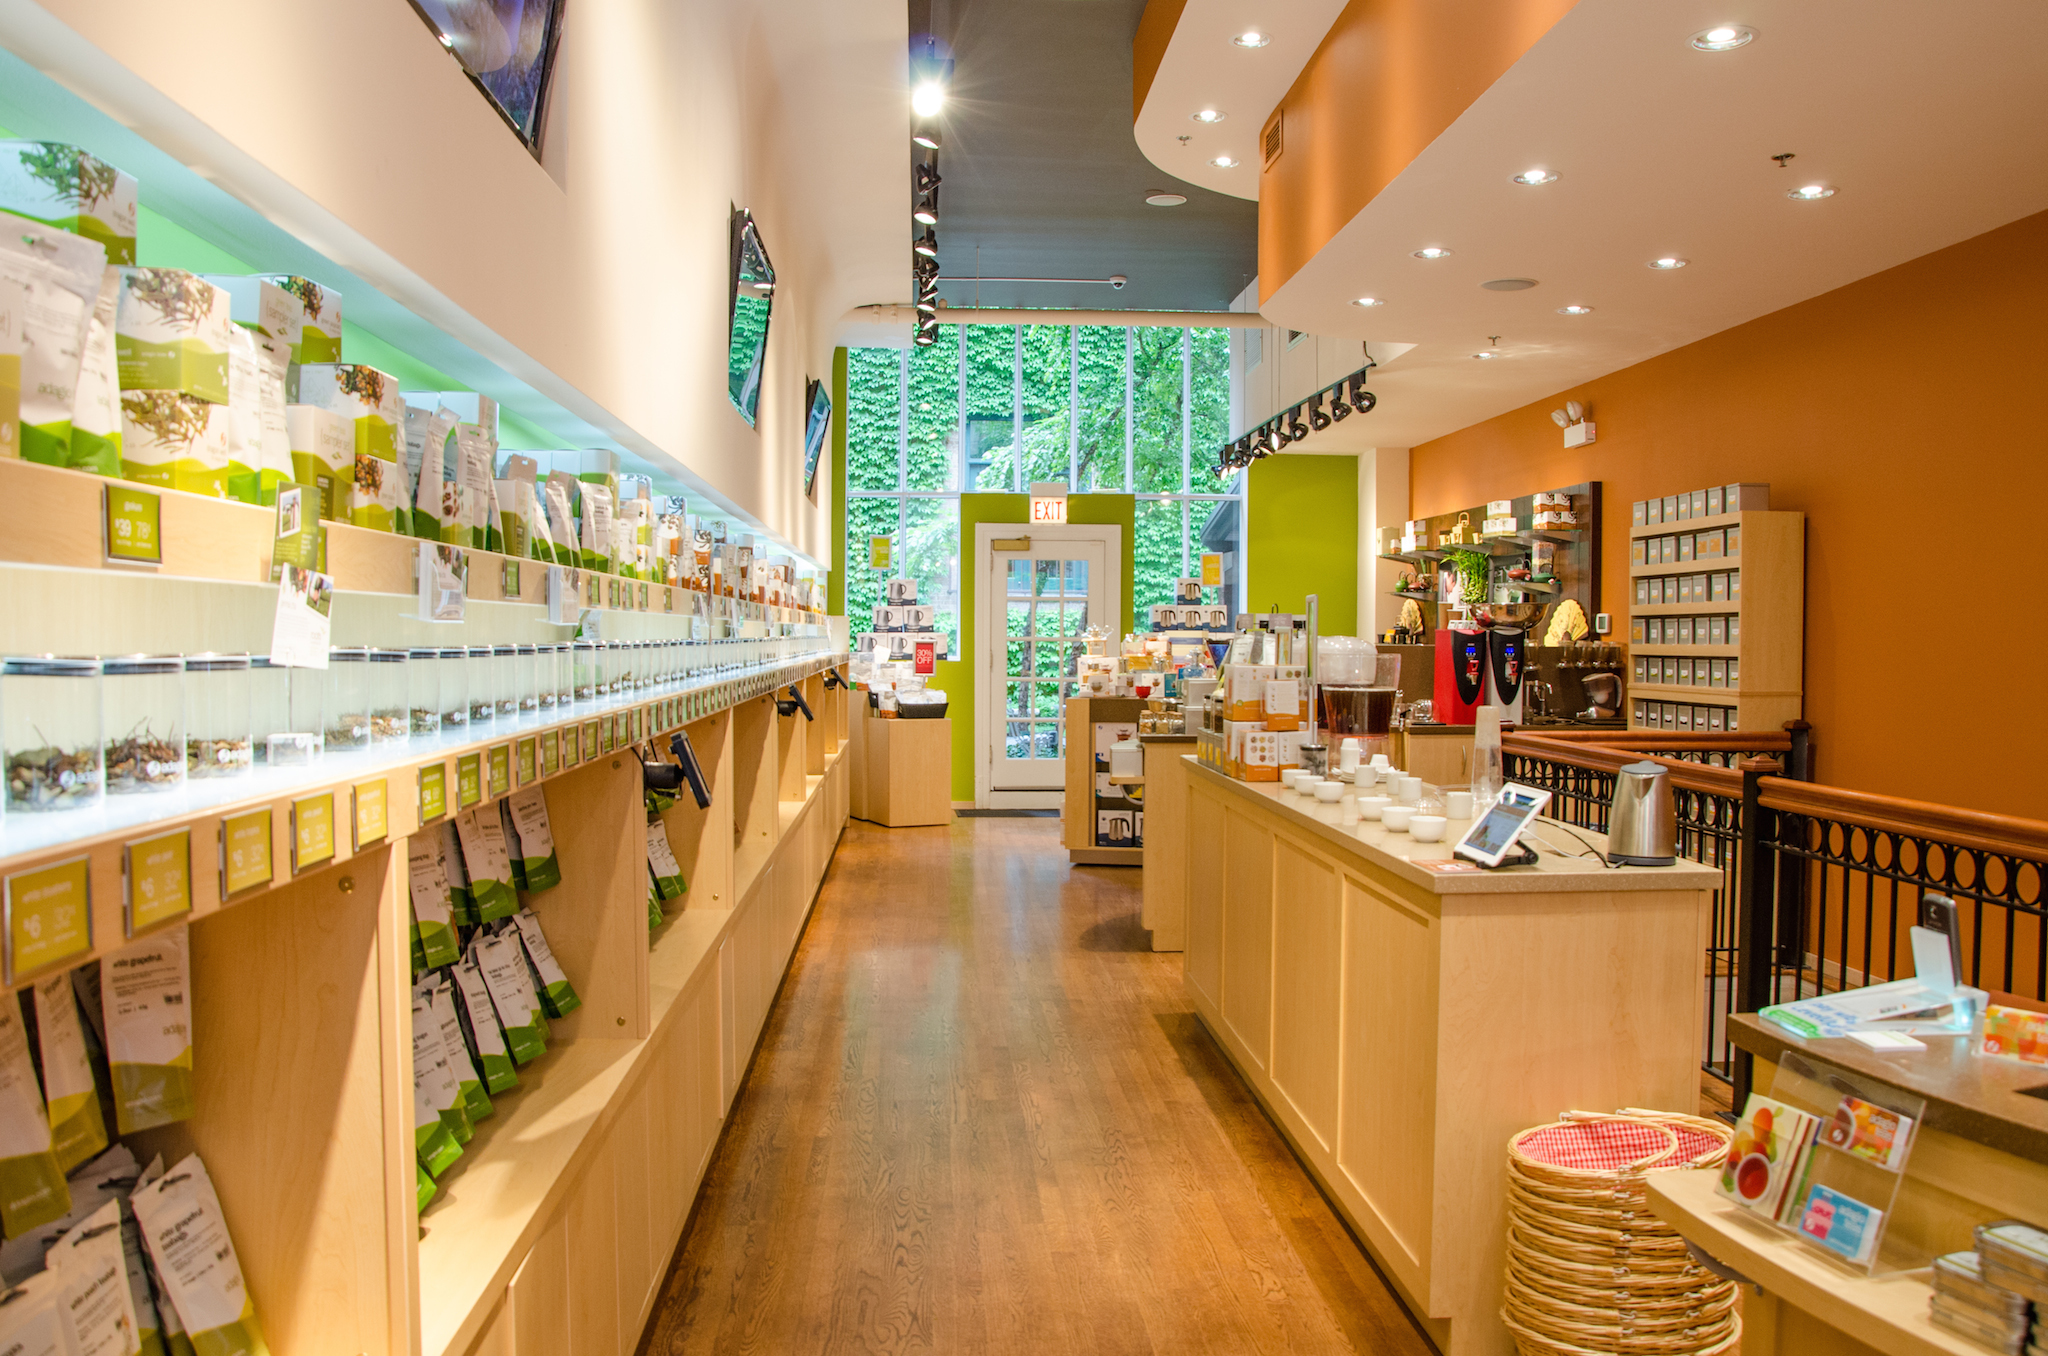 Tea shop guide: Where to buy oolong, teapots and more